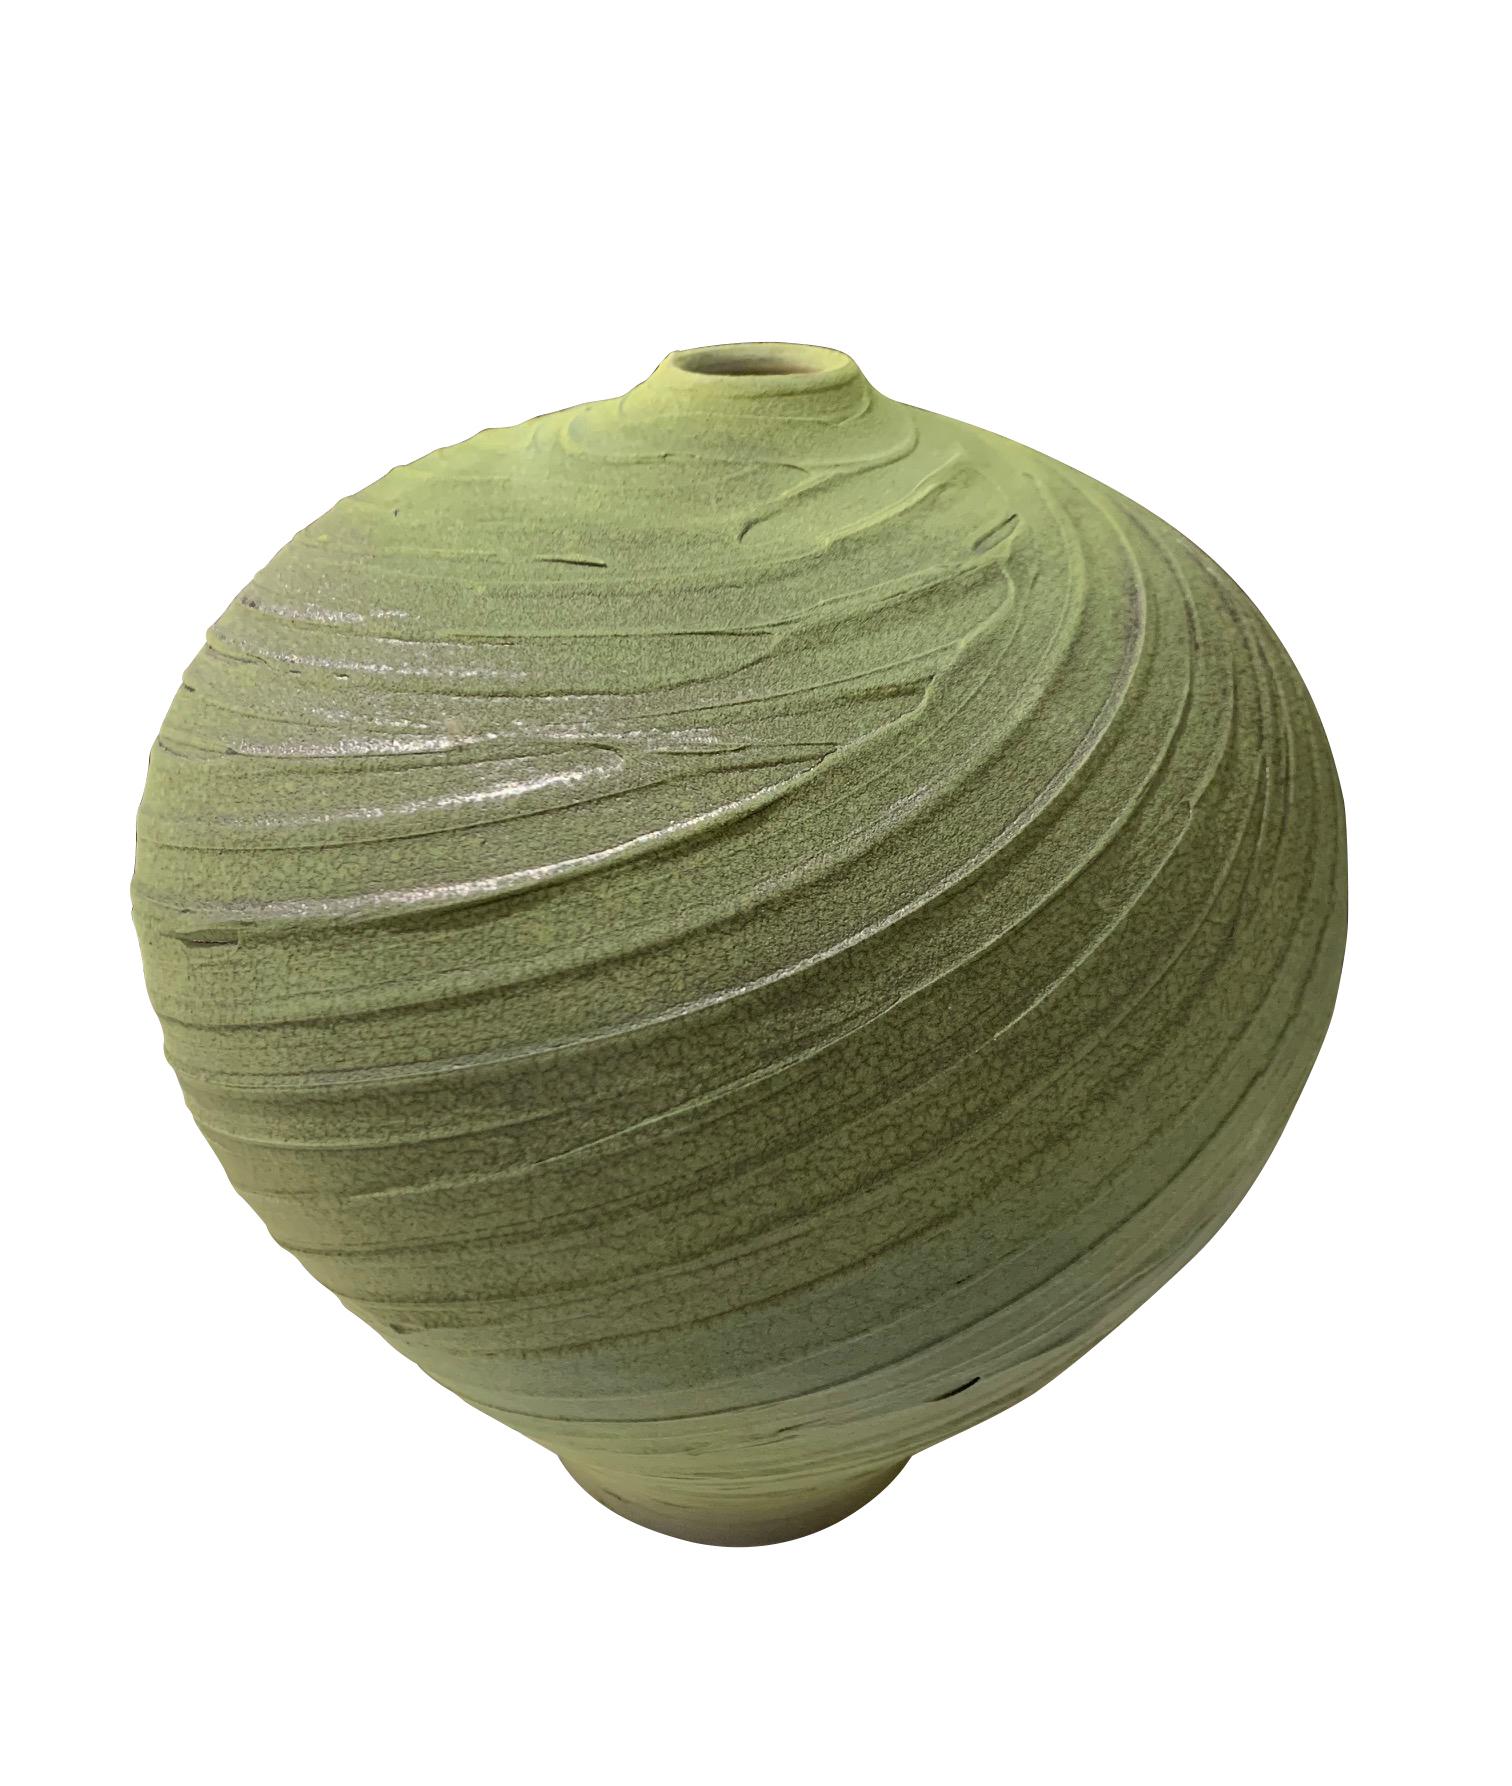 Contemporary textured ceramic earthenware vase.
Green body carved in a spiral pattern.
The vase design has an ancient feel.
Hand made one of a kind.
Part of a collection of earthenware vases.